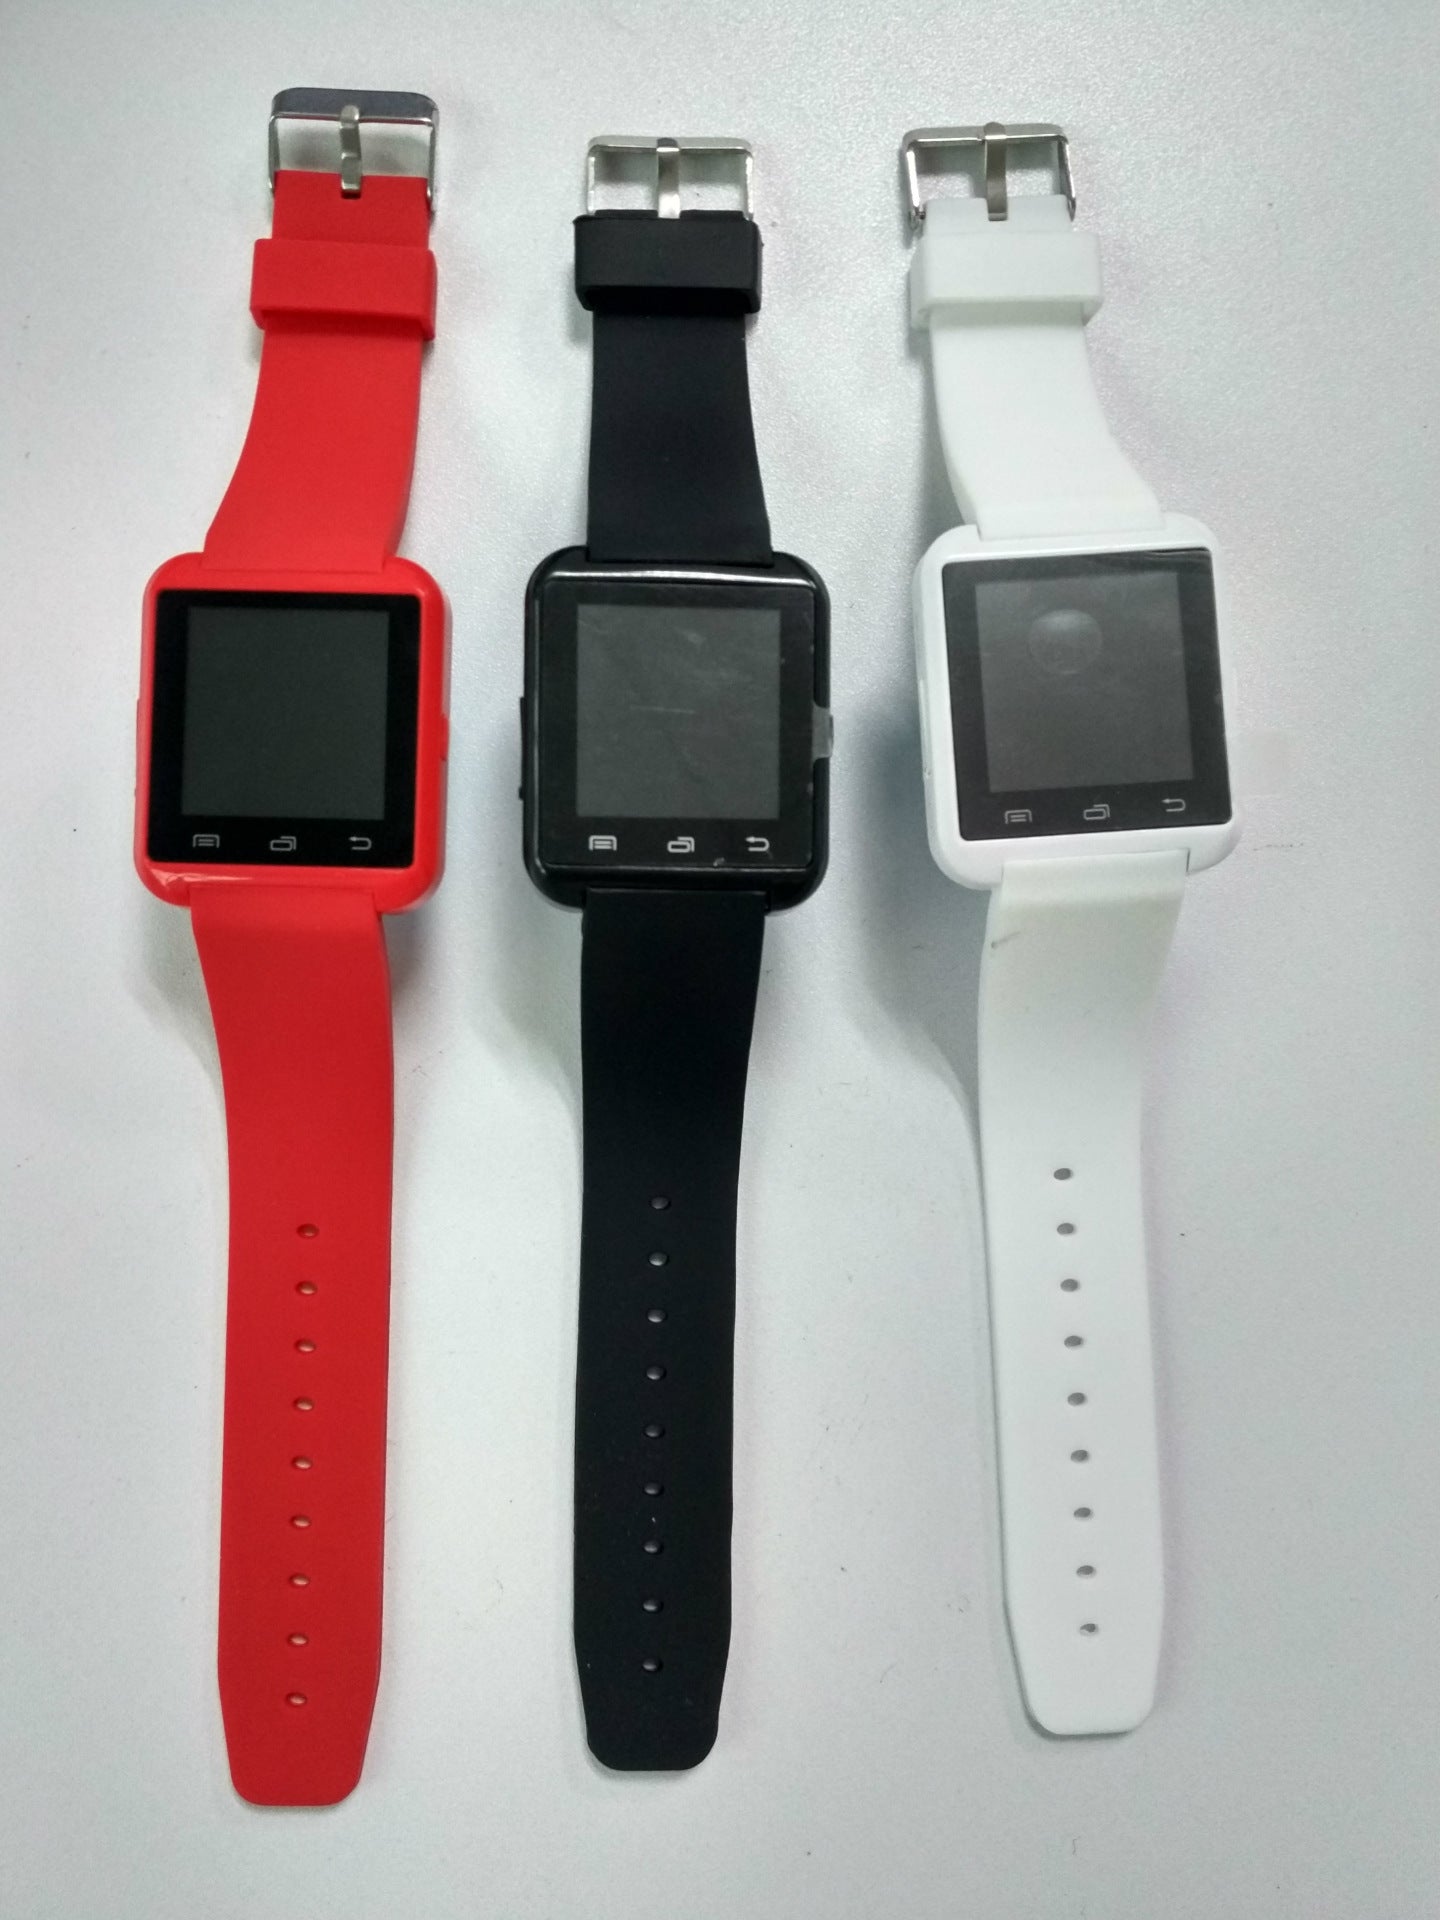 New smart watches wholesale U8 smart watches, Bluetooth smart wear sports watch factory special offer